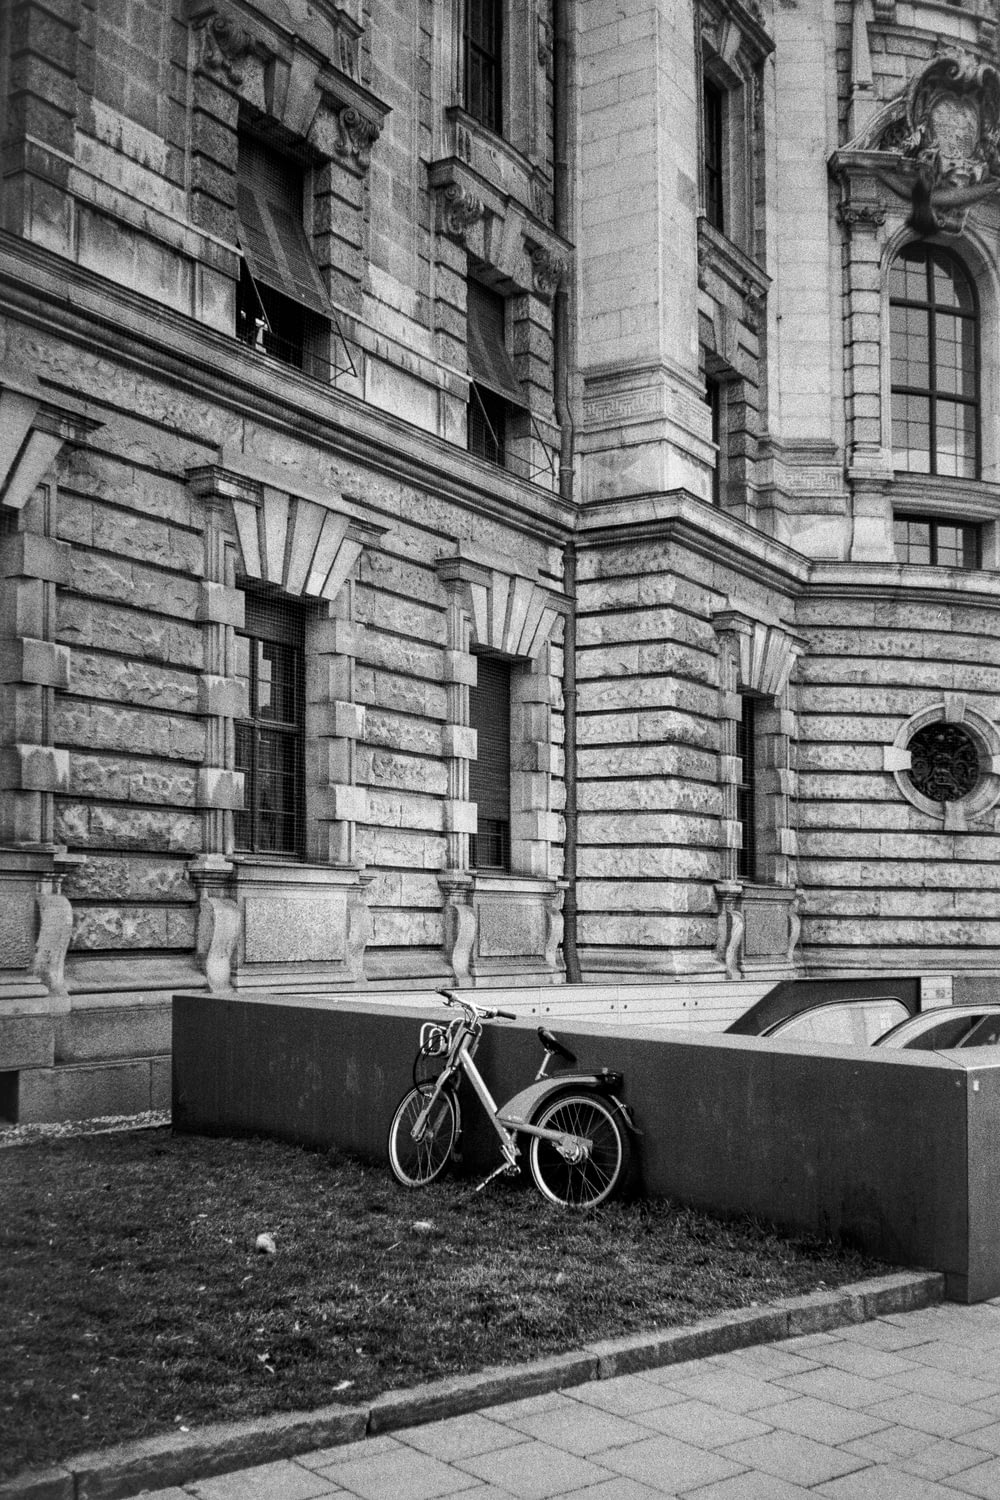 a bike is parked in front of a building